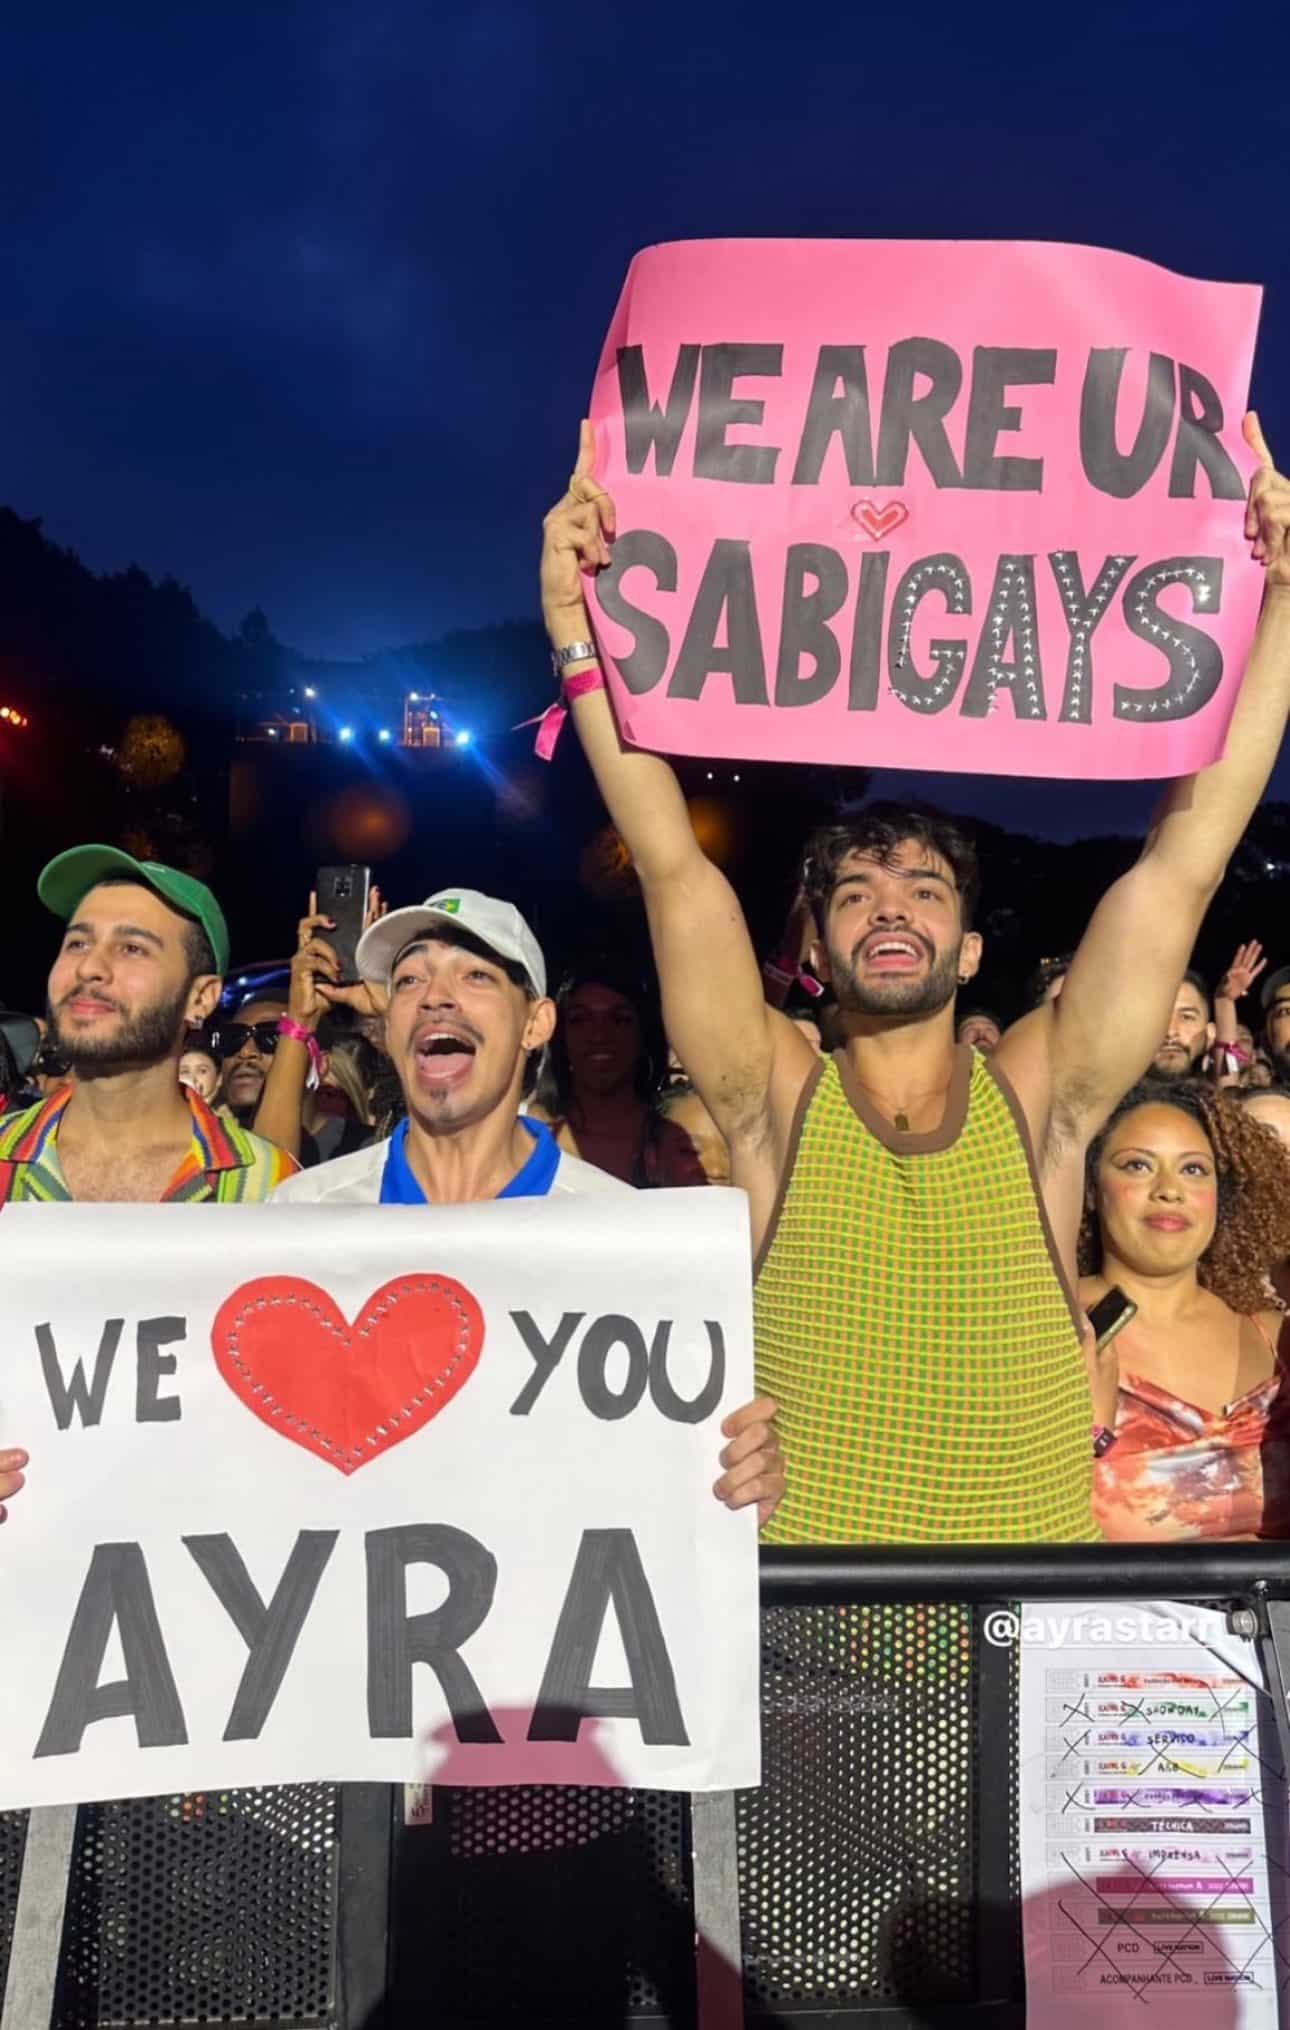 Nigerians drag Ayra Starr for being touchy with her "SabiGays" Brazilian fans at Brazil concert